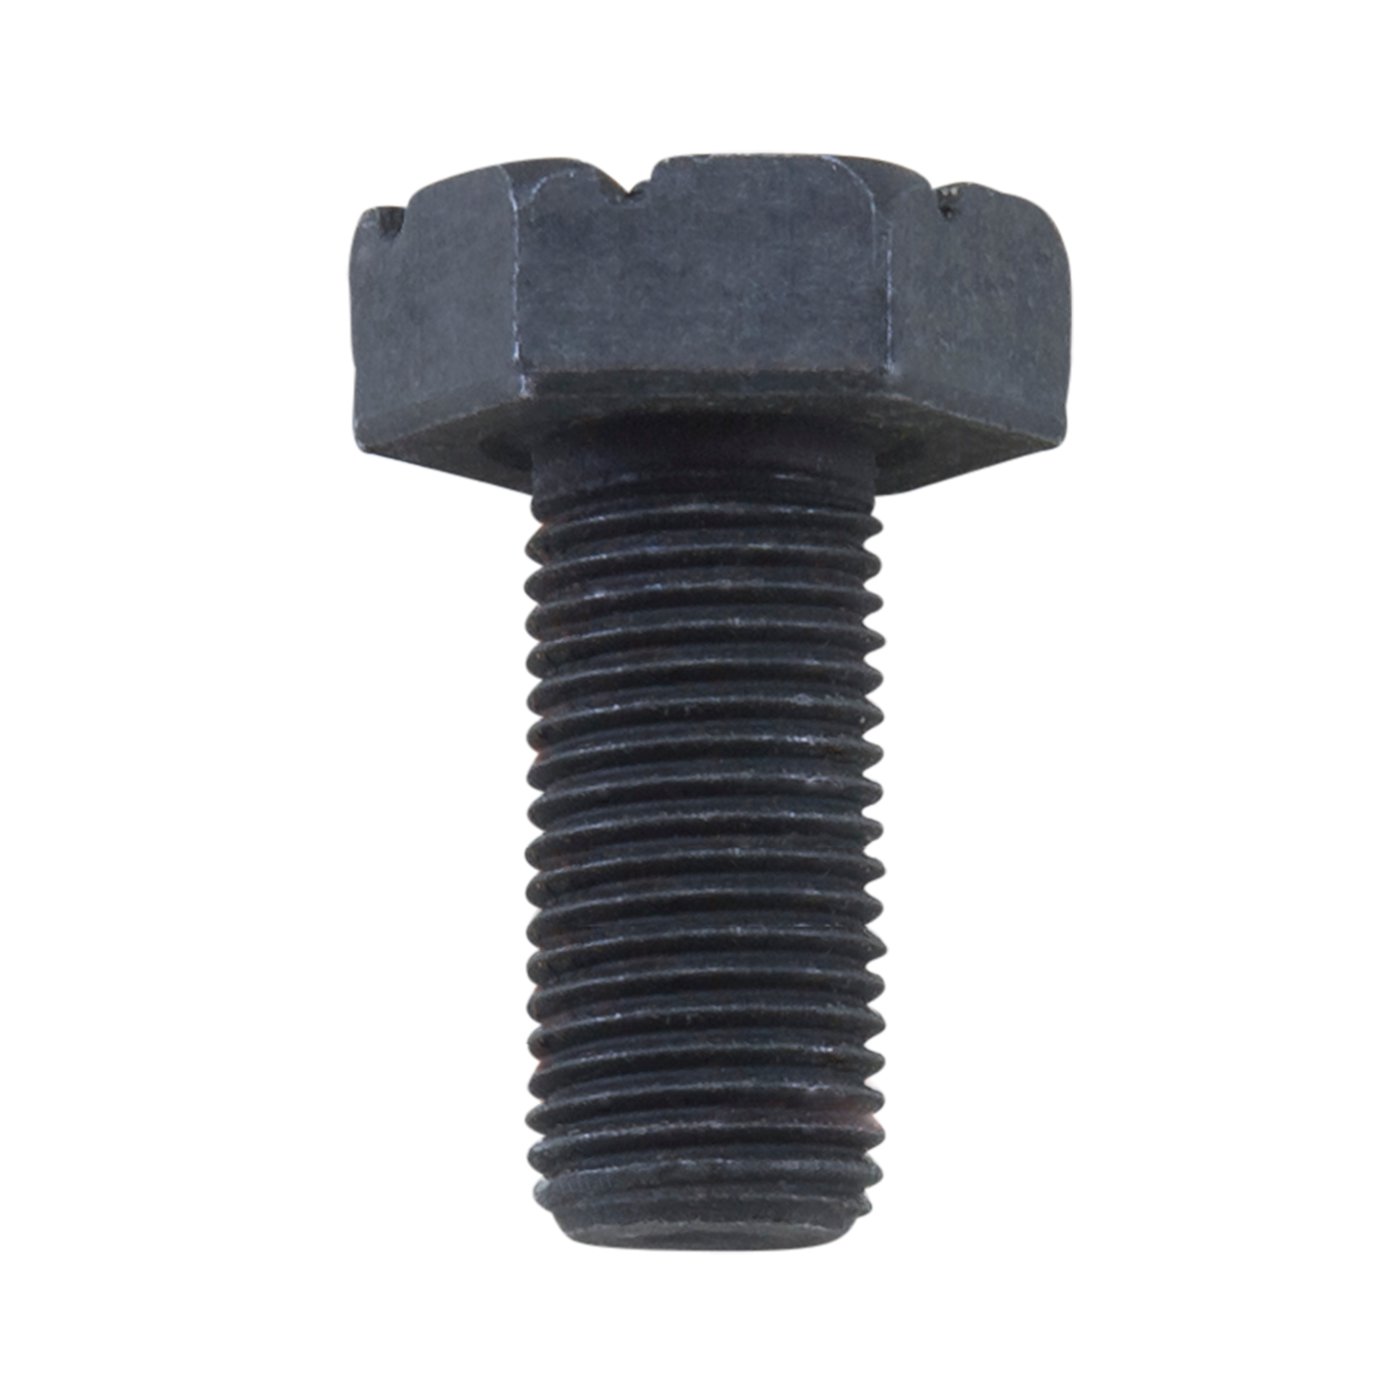 Ford 9.75 in. Ring Gear Bolt